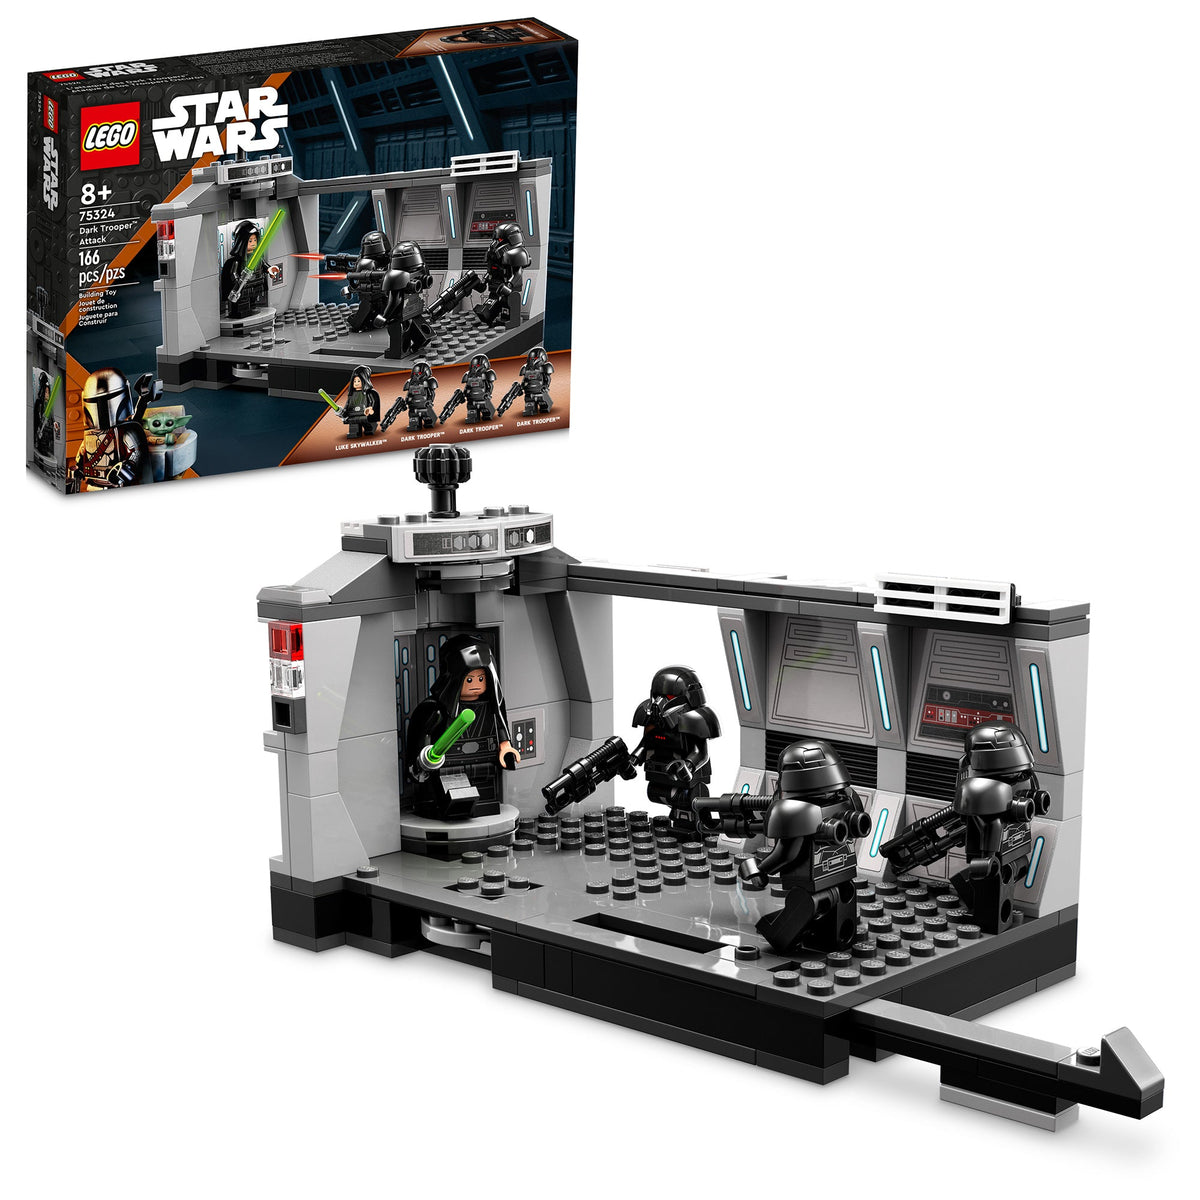 LEGO Toys & Games LEGO Star Wars Dark Trooper Attack, 75324, Ages 8+, 166 Pieces 673419356749